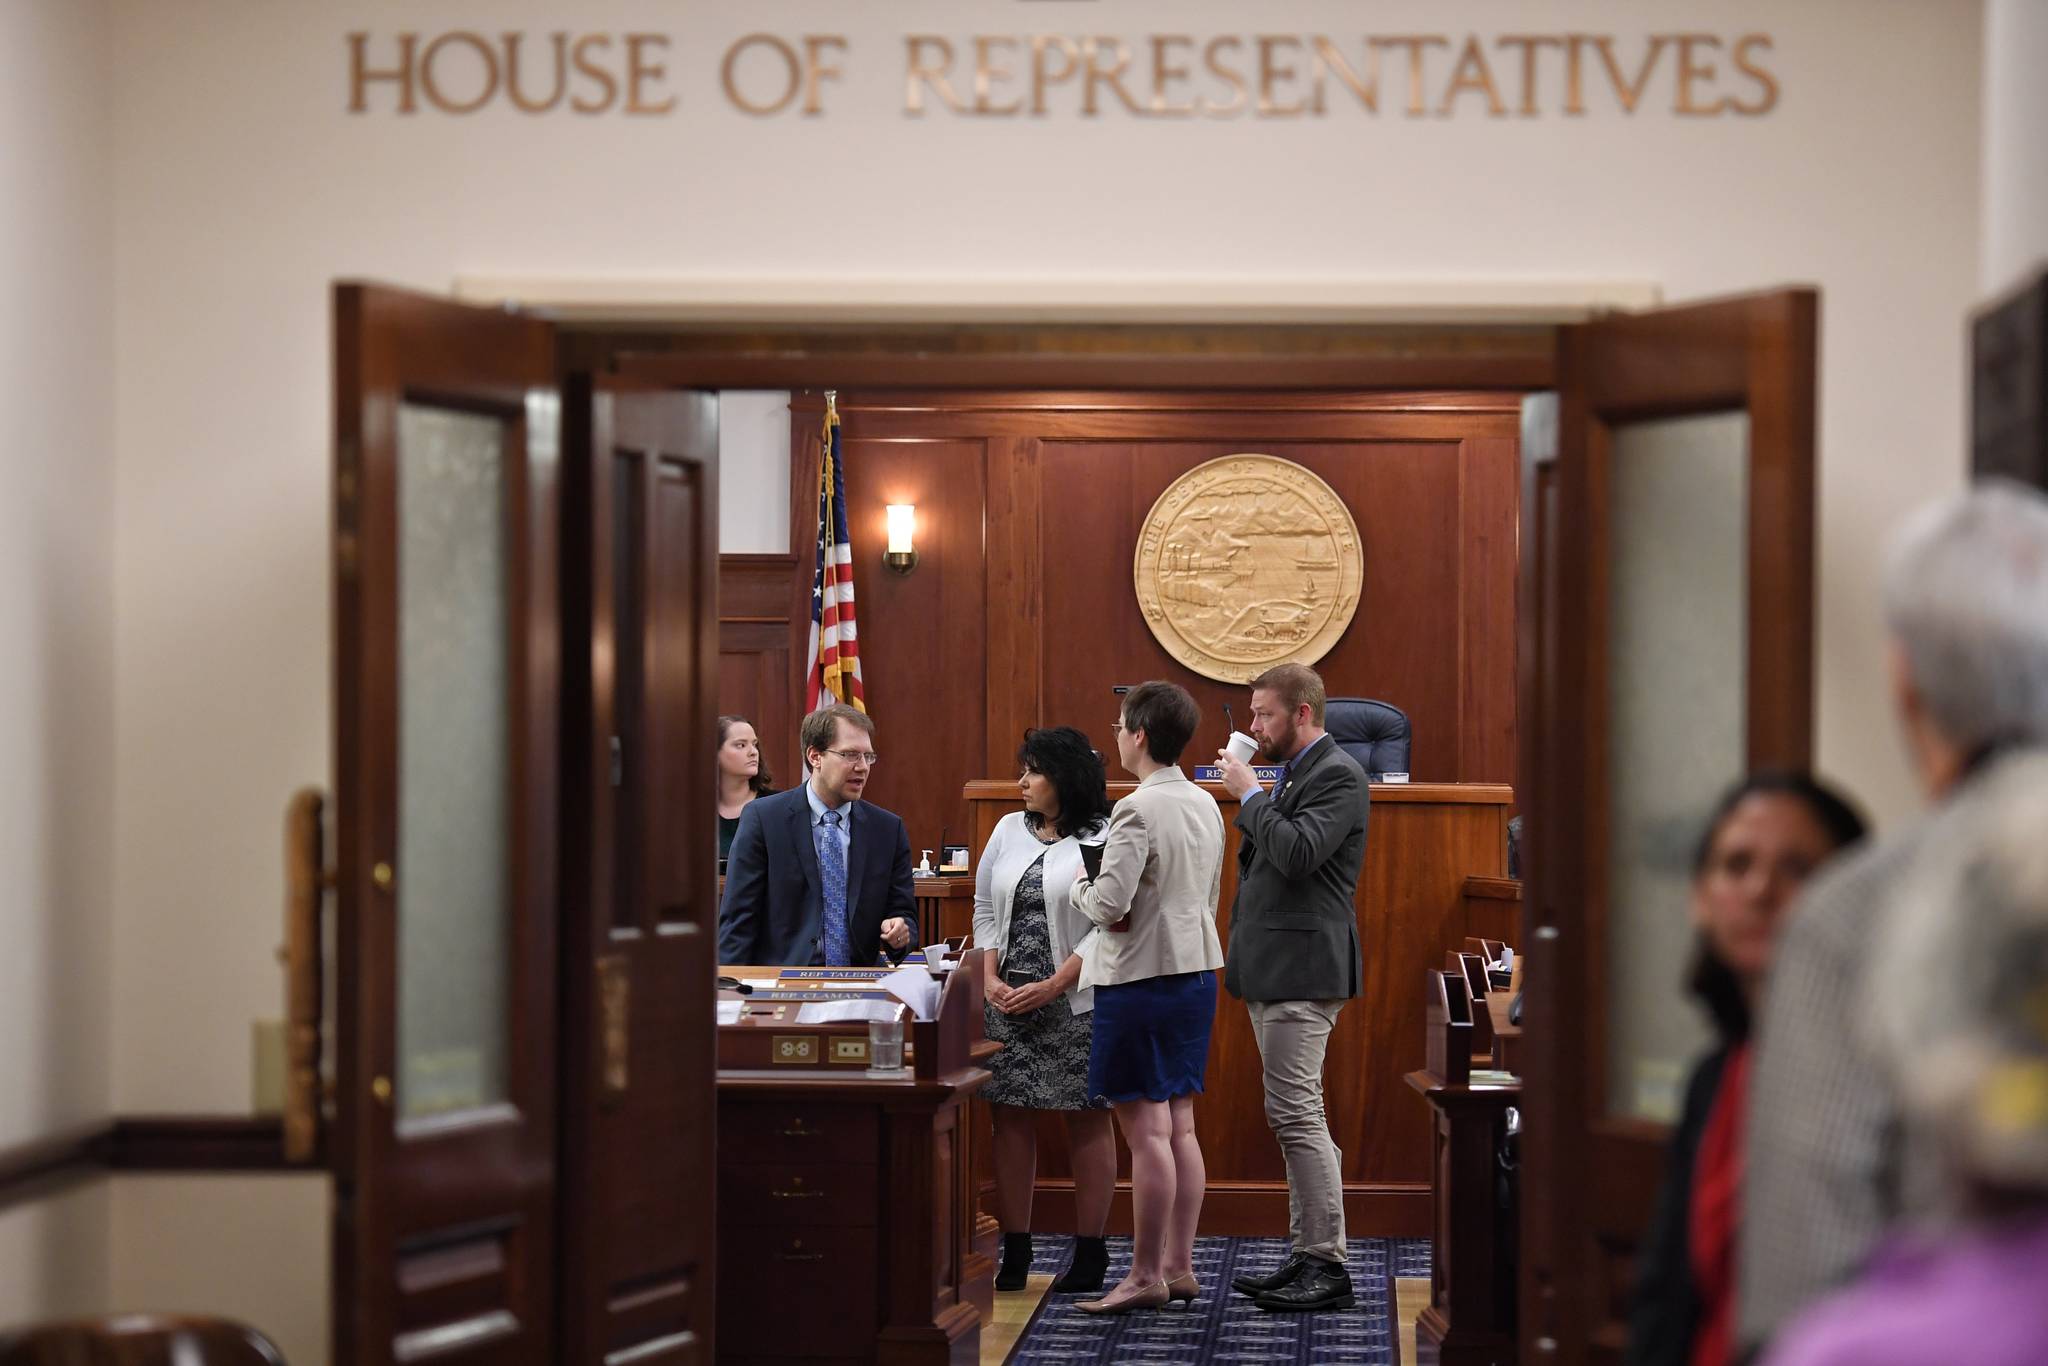 House Minority members stay to talk in the House after adjournment on Thursday, June 13, 2019. (Michael Penn | Juneau Empire)